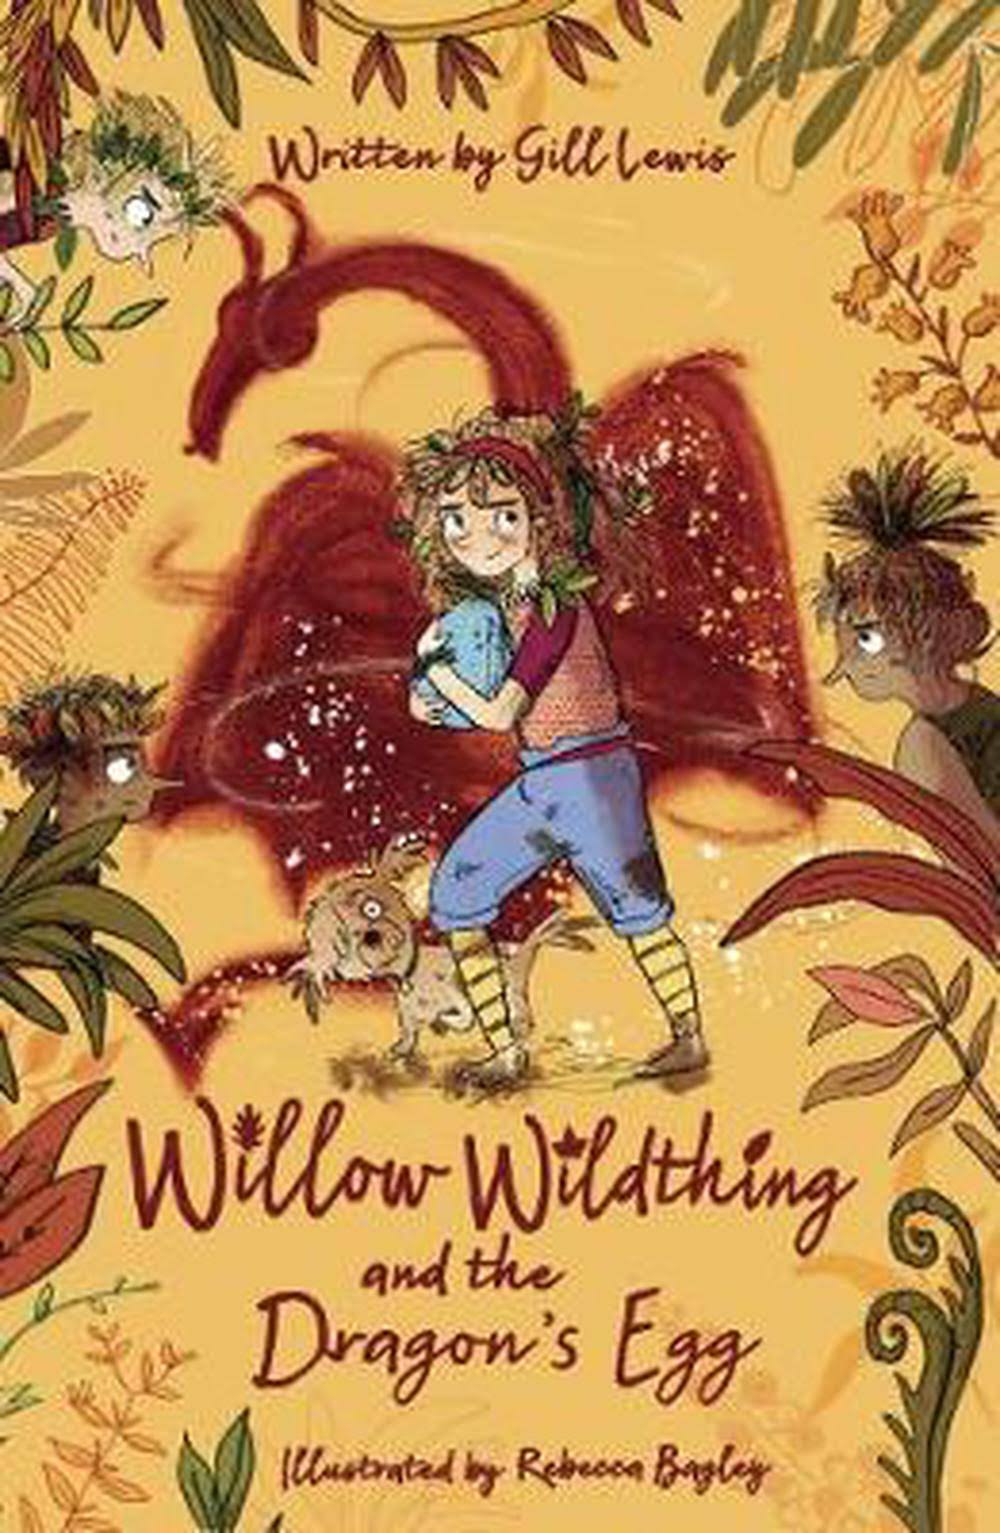 Willow Wildthing and The Dragon's Egg by Gill Lewis